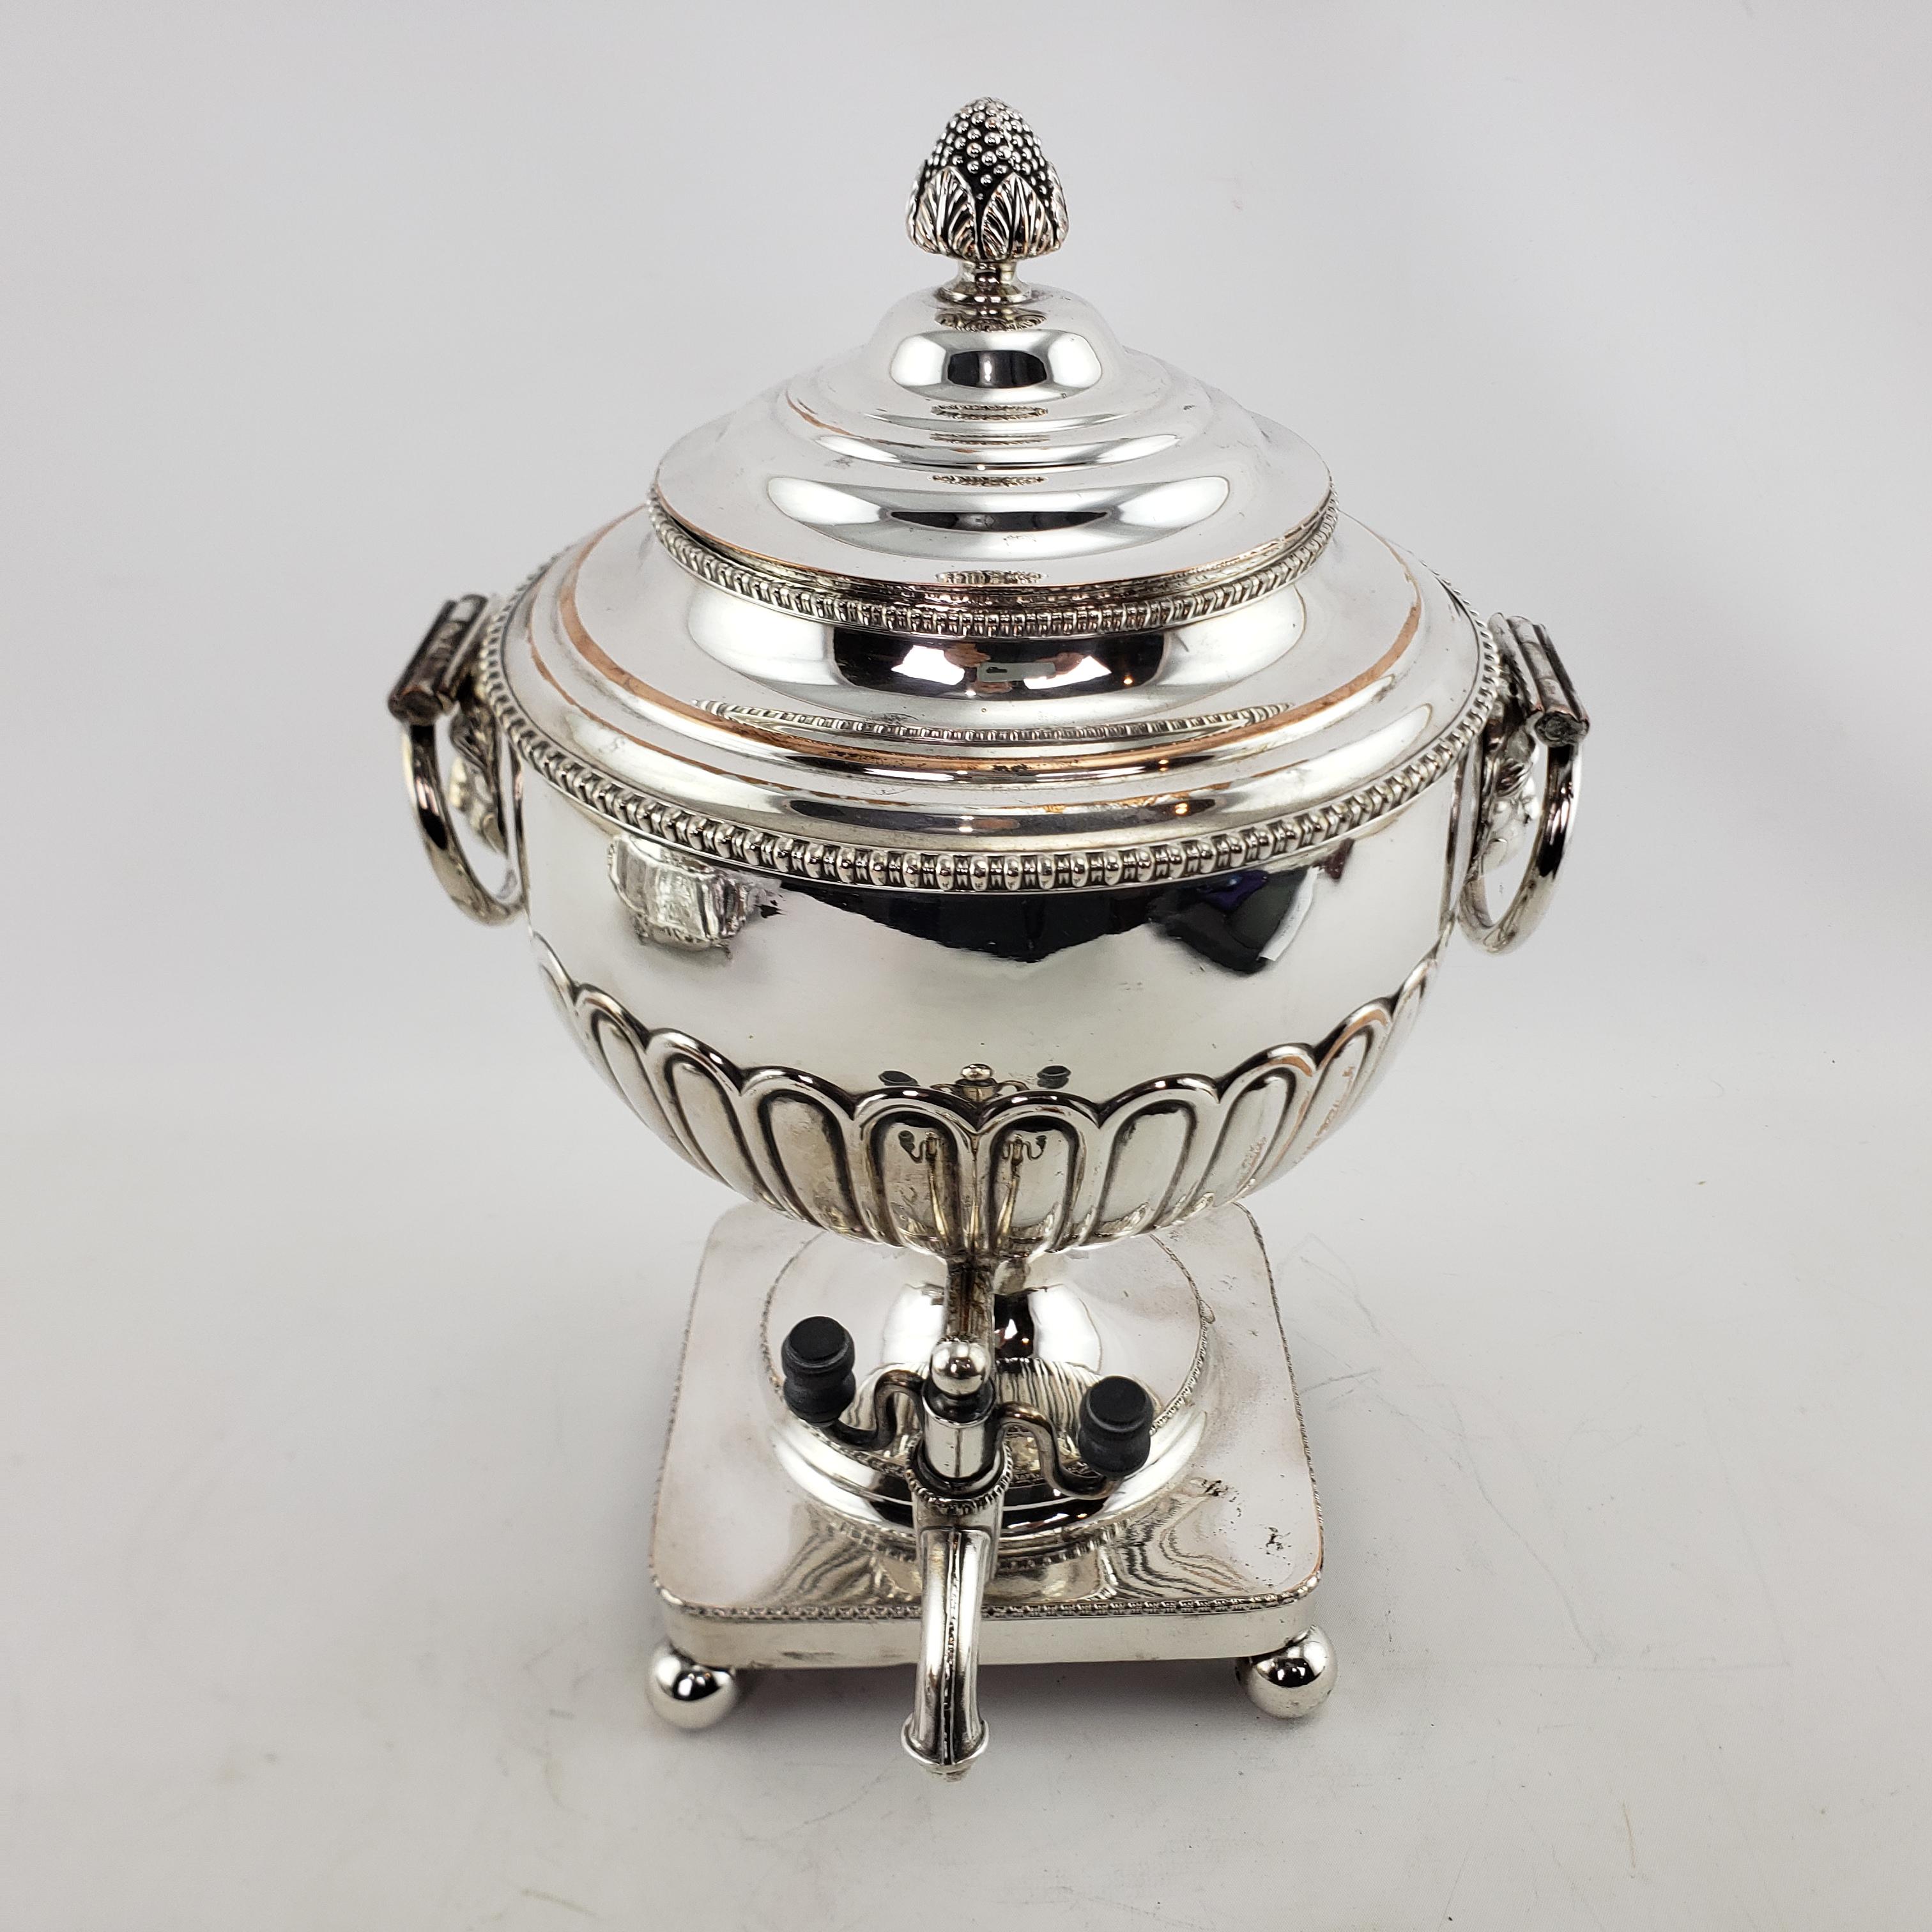 Antique Georgian Styled Silver Plated Tea or Hot Water Urn with Lion Mounts In Good Condition For Sale In Hamilton, Ontario